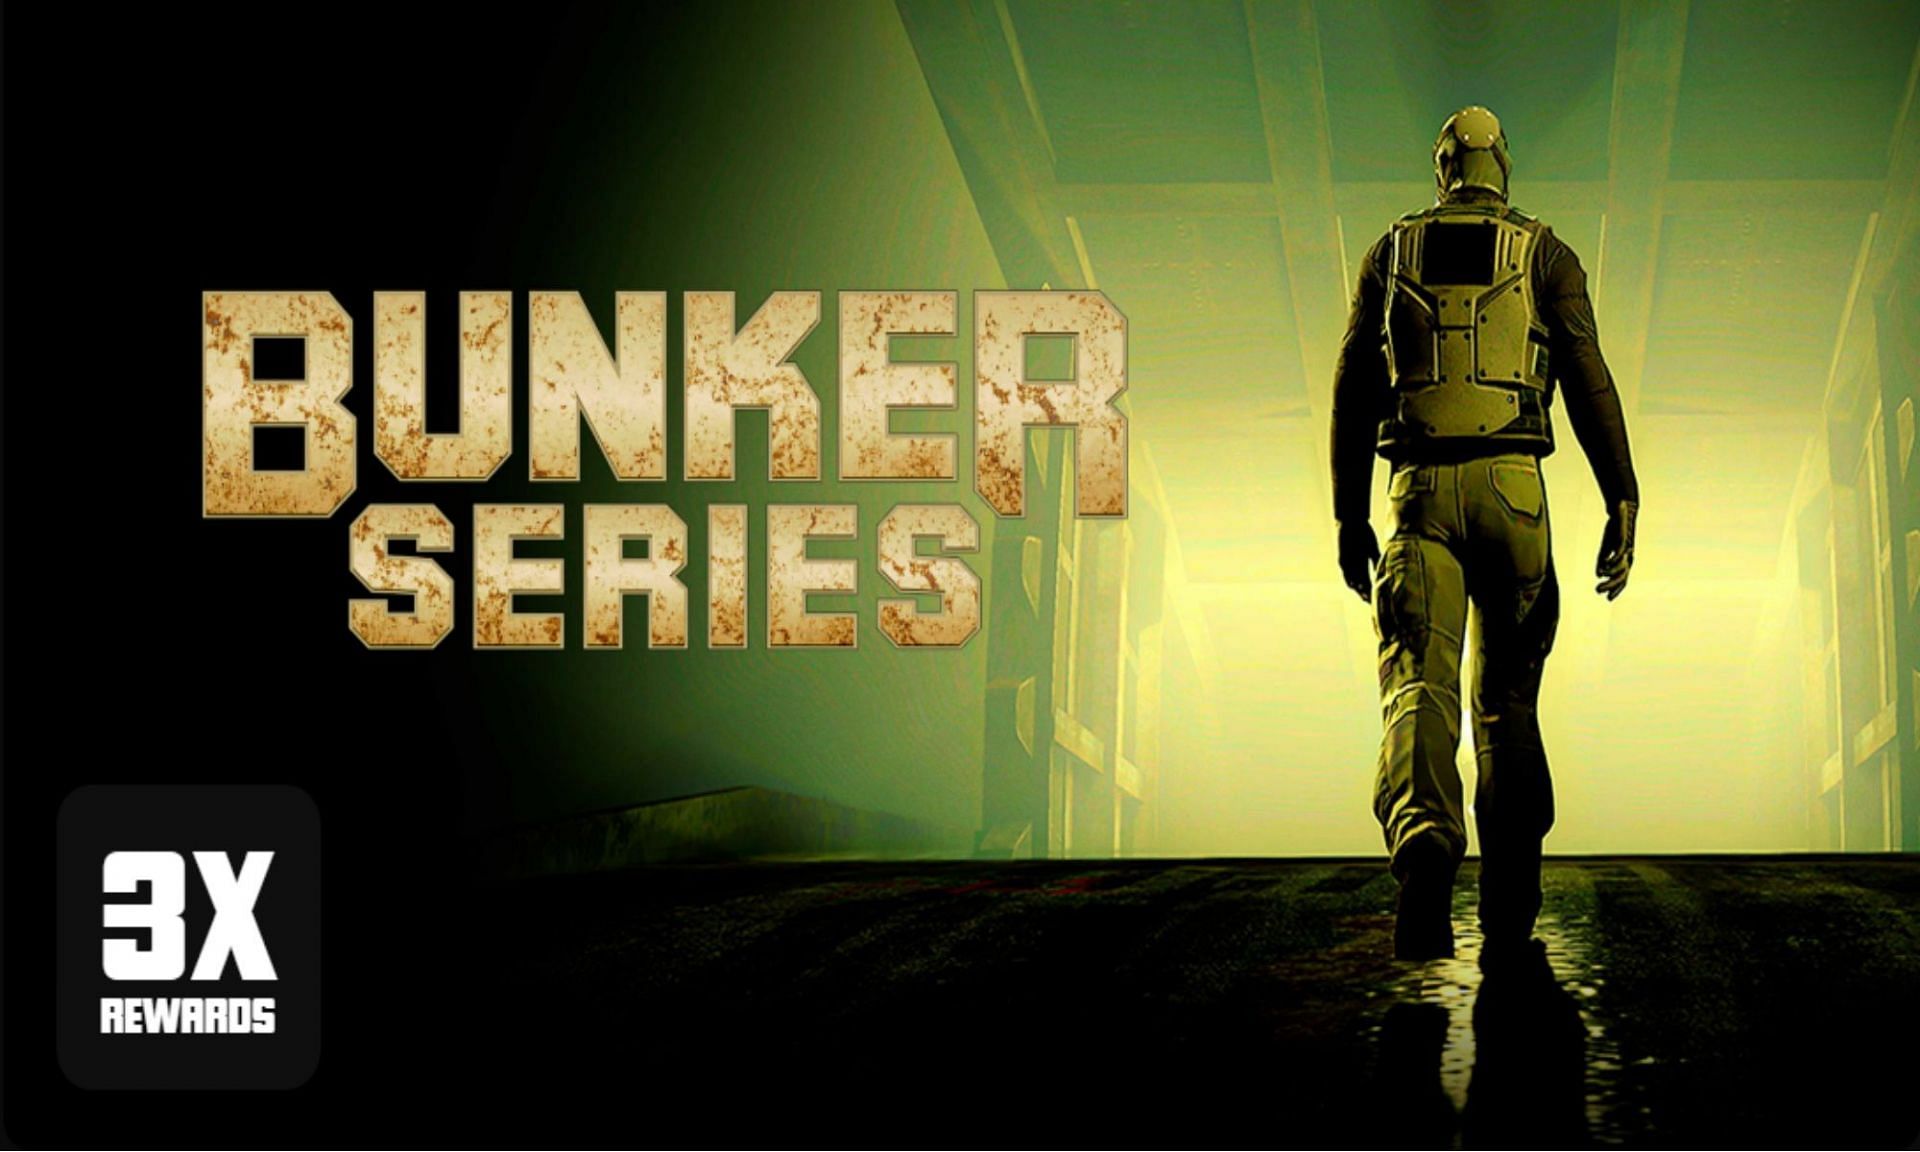 The Bunker Series is now given more focus in GTA Online (Image via Rockstar Games)